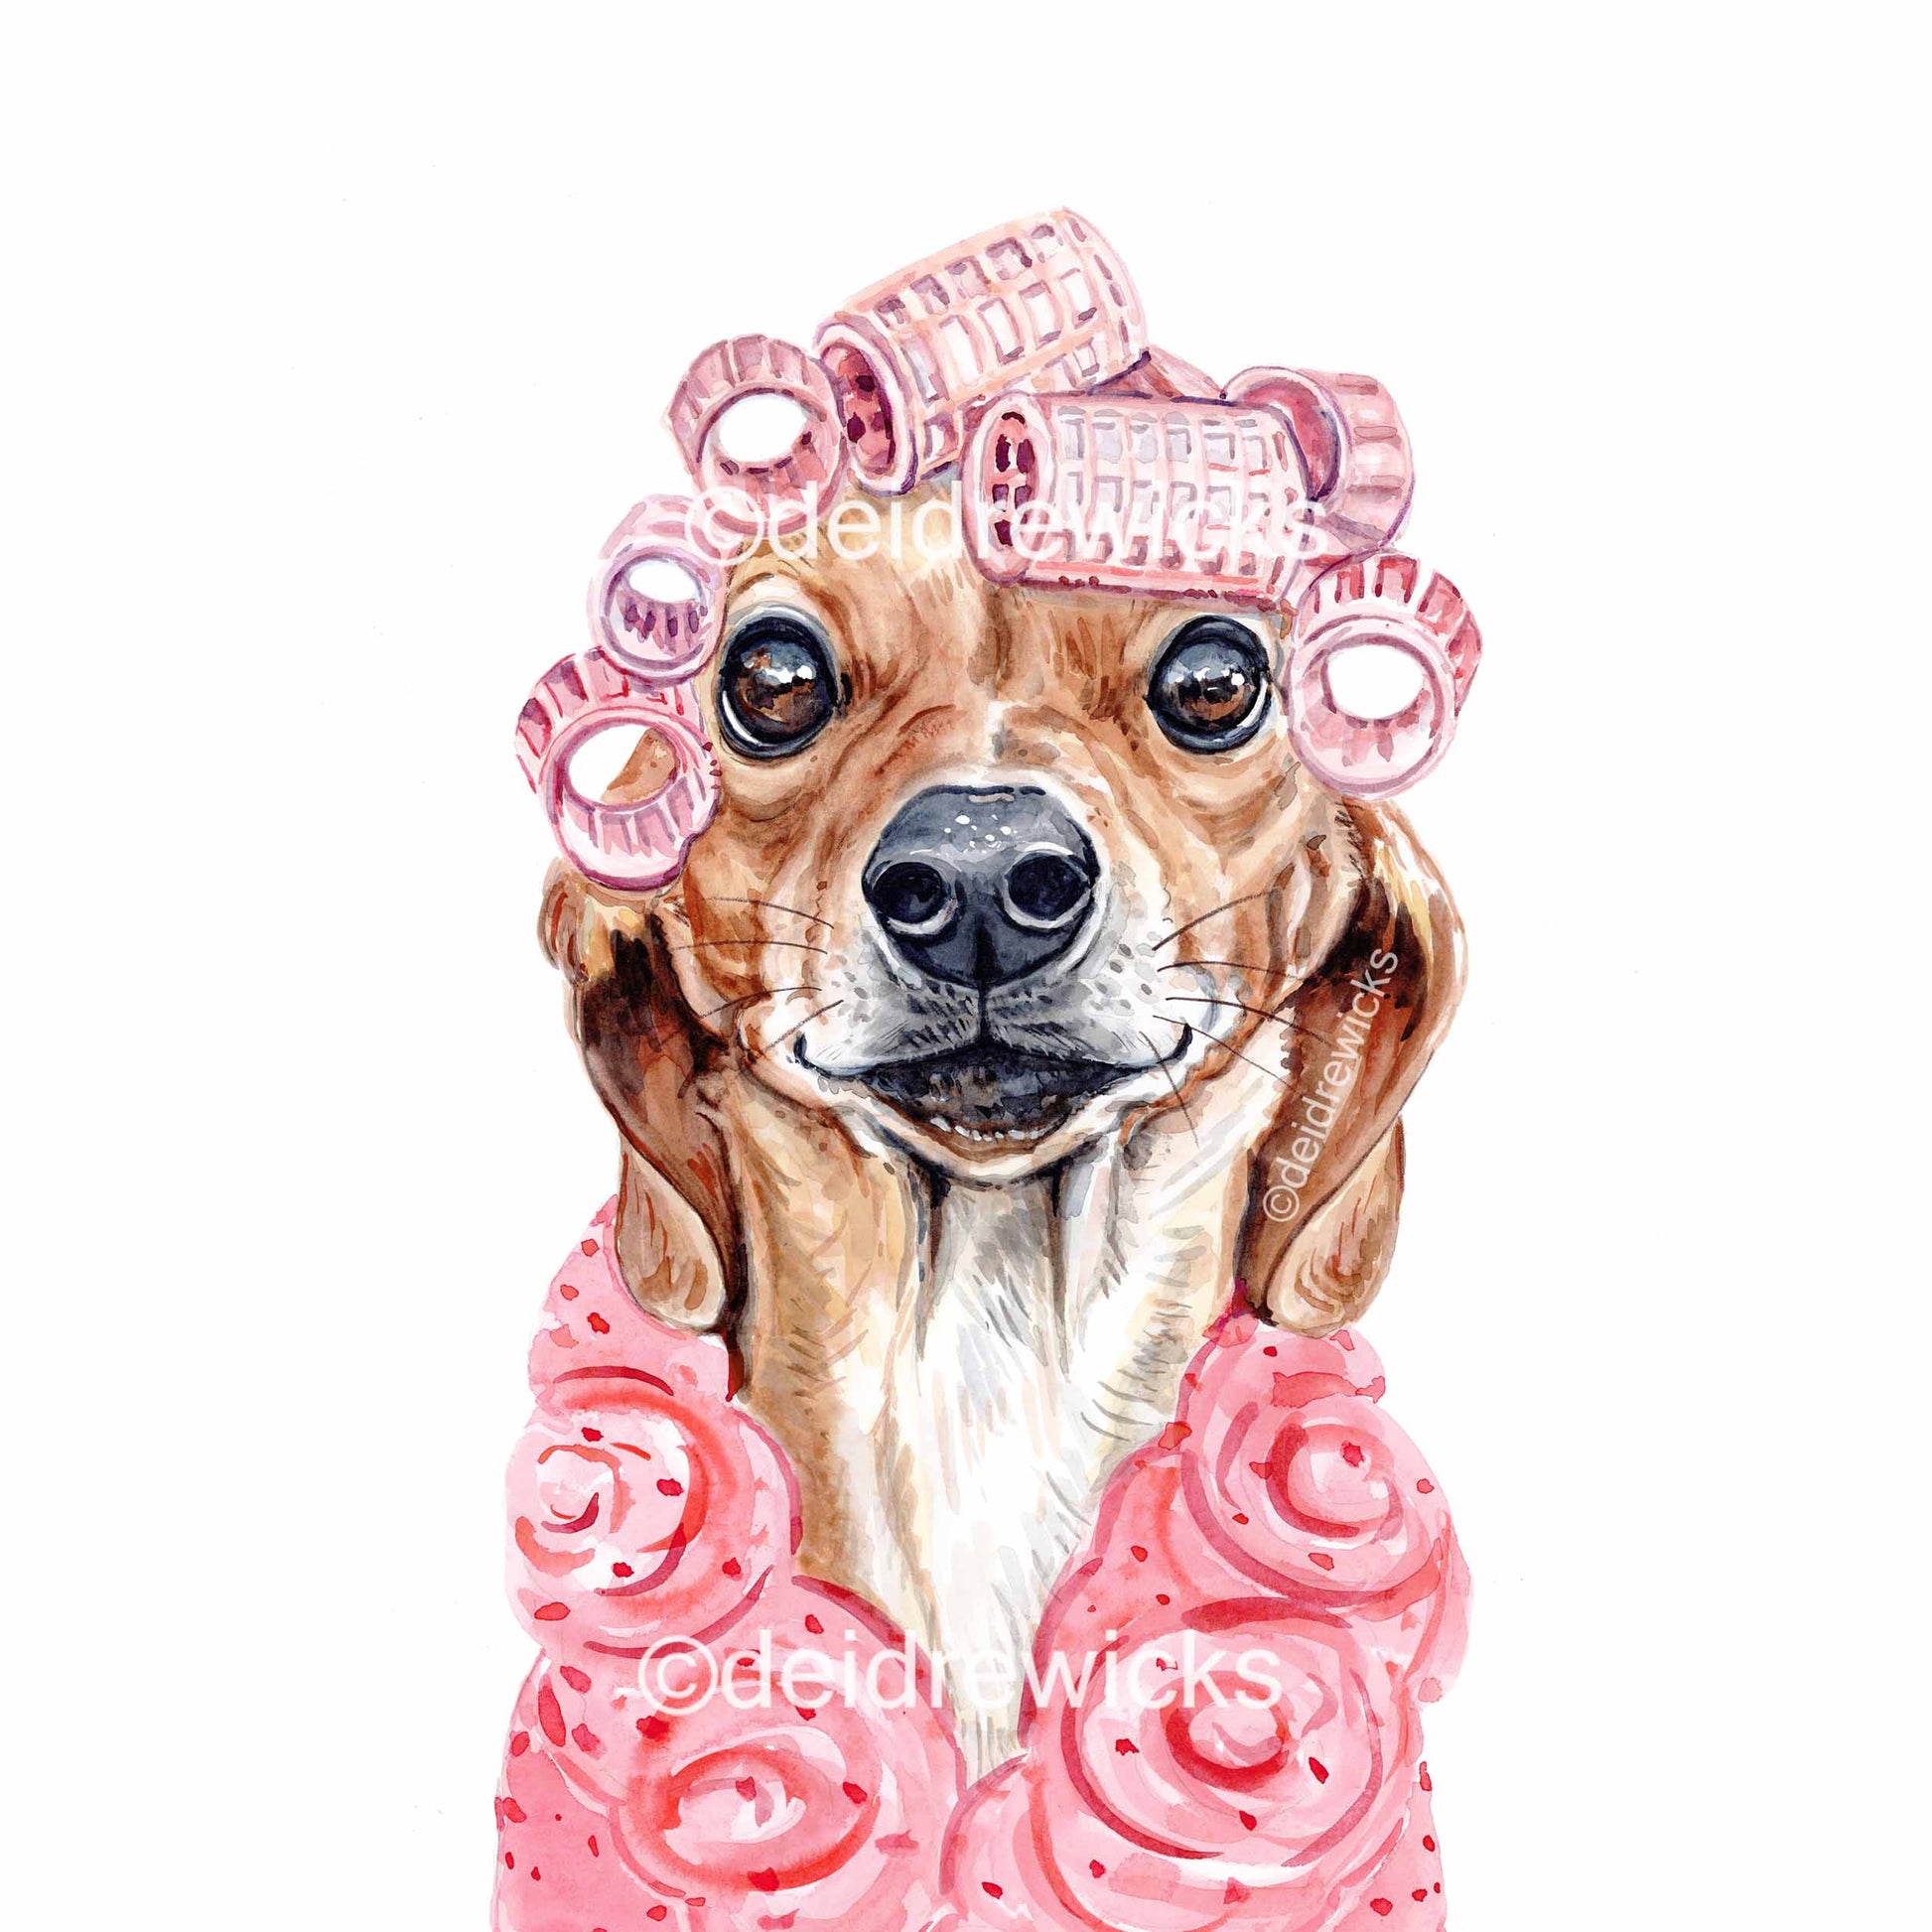 Watercolour painting of a dachshund dog wearing a fuzzy pink bathrobe with curlers in her hair